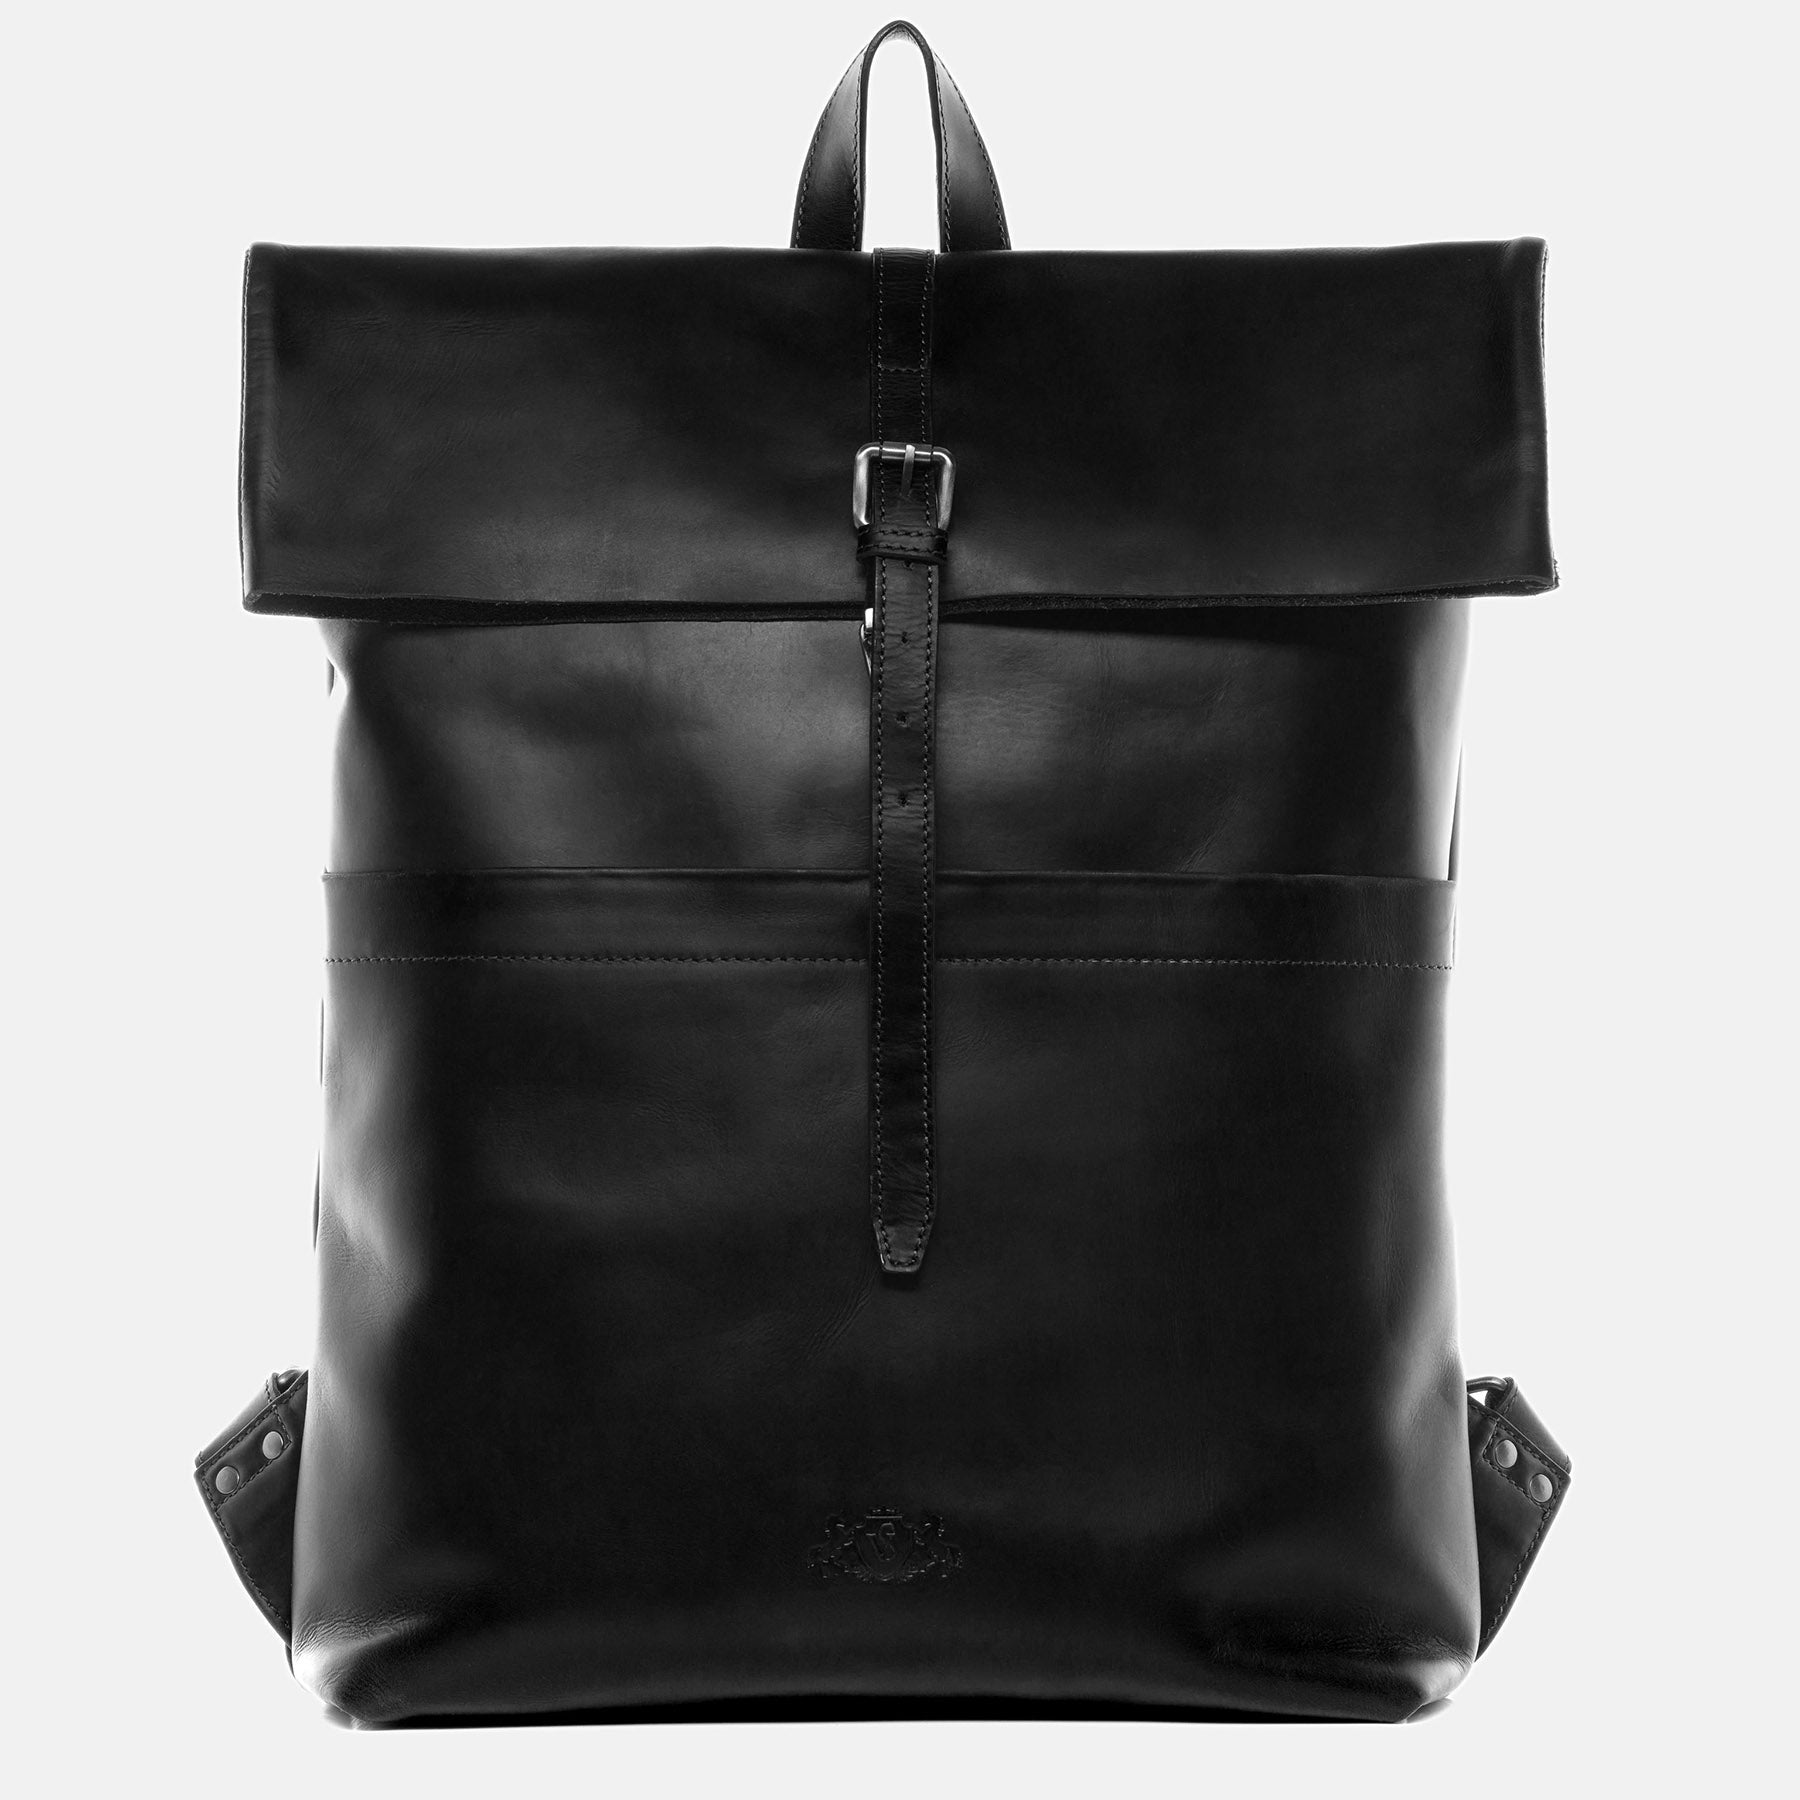 Rolltop backpack CLAY smooth leather black